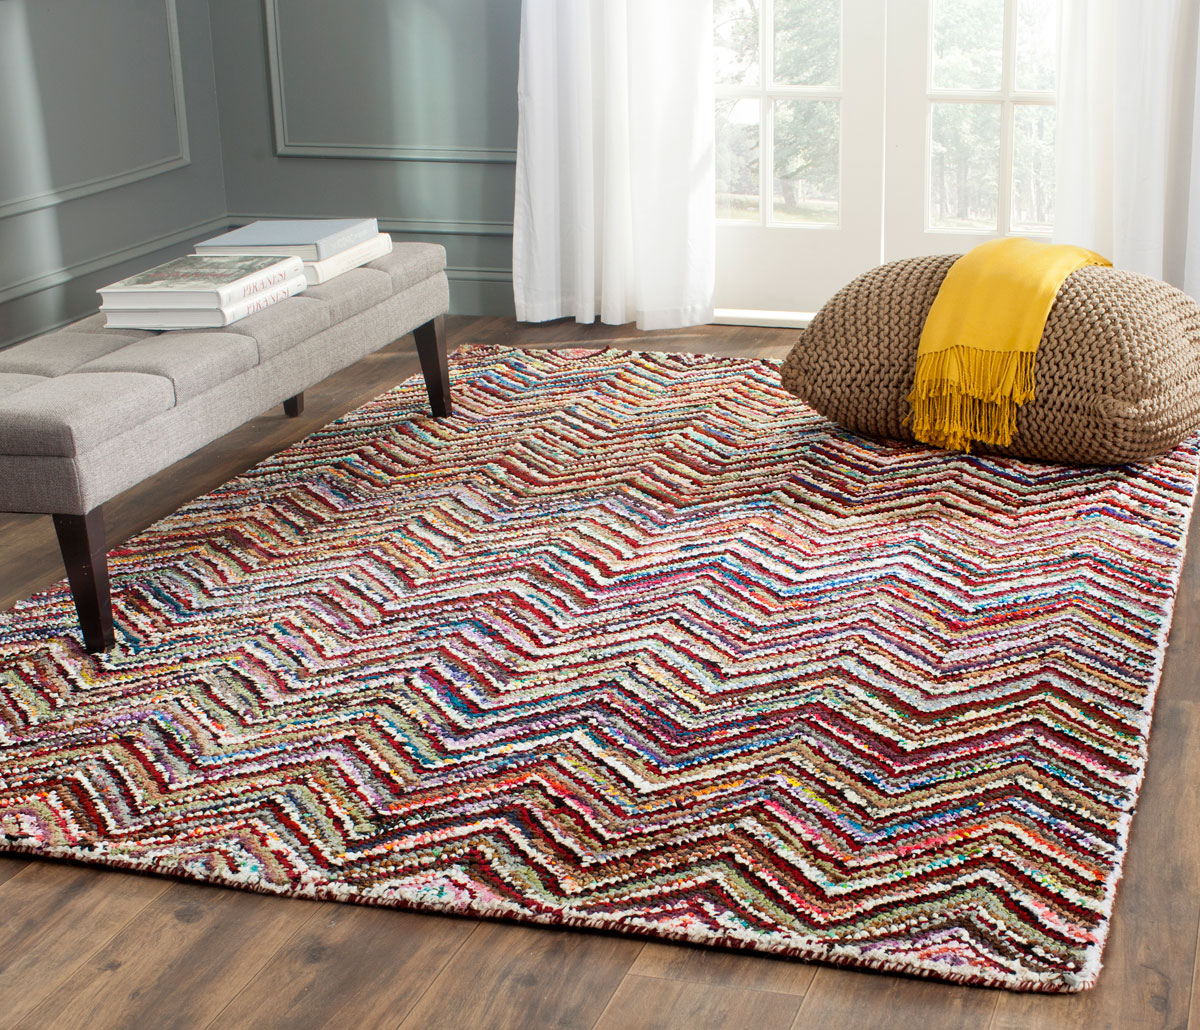 Cotton Rugs – Tips To Choose